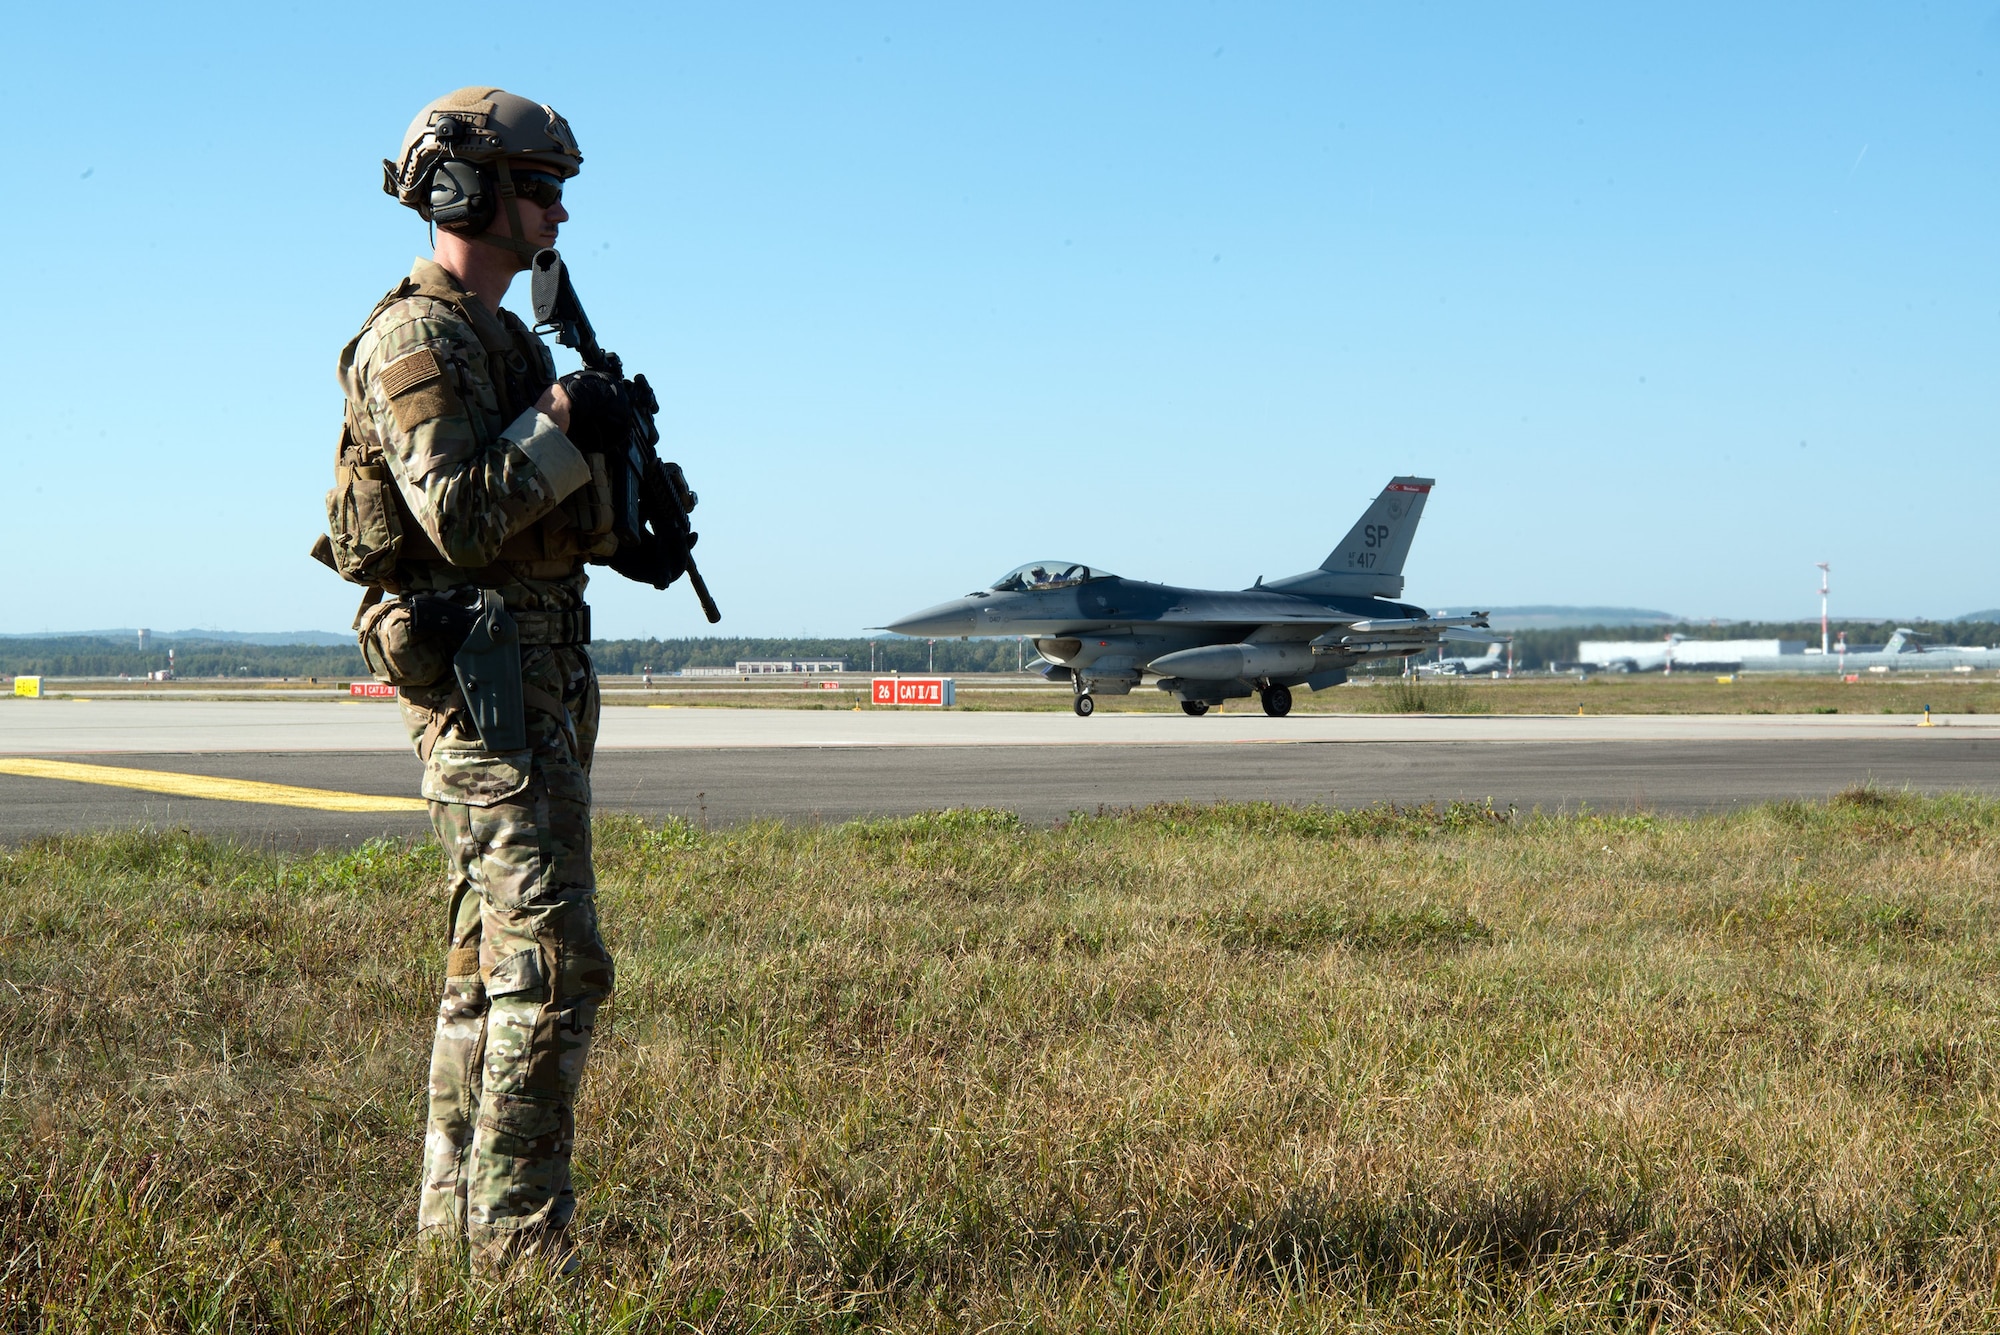 U.S. Air Force Staff Sgt. Dwight Stalter, 435th Security Forces Squadron team leader, stands guard while an F-16 Fighting Falcon pilot waits for his aircraft to be refueled on Ramstein Air Base, Germany, Oct. 4, 2018. Members of the 435th SFS participated in Temperate Ace, a proof-of-concept exercise led by the 435th Air Ground Operations Wing, demonstrating strike force capabilities. (U.S. Air Force Photo by Airman 1st Class Noah D. Coger)